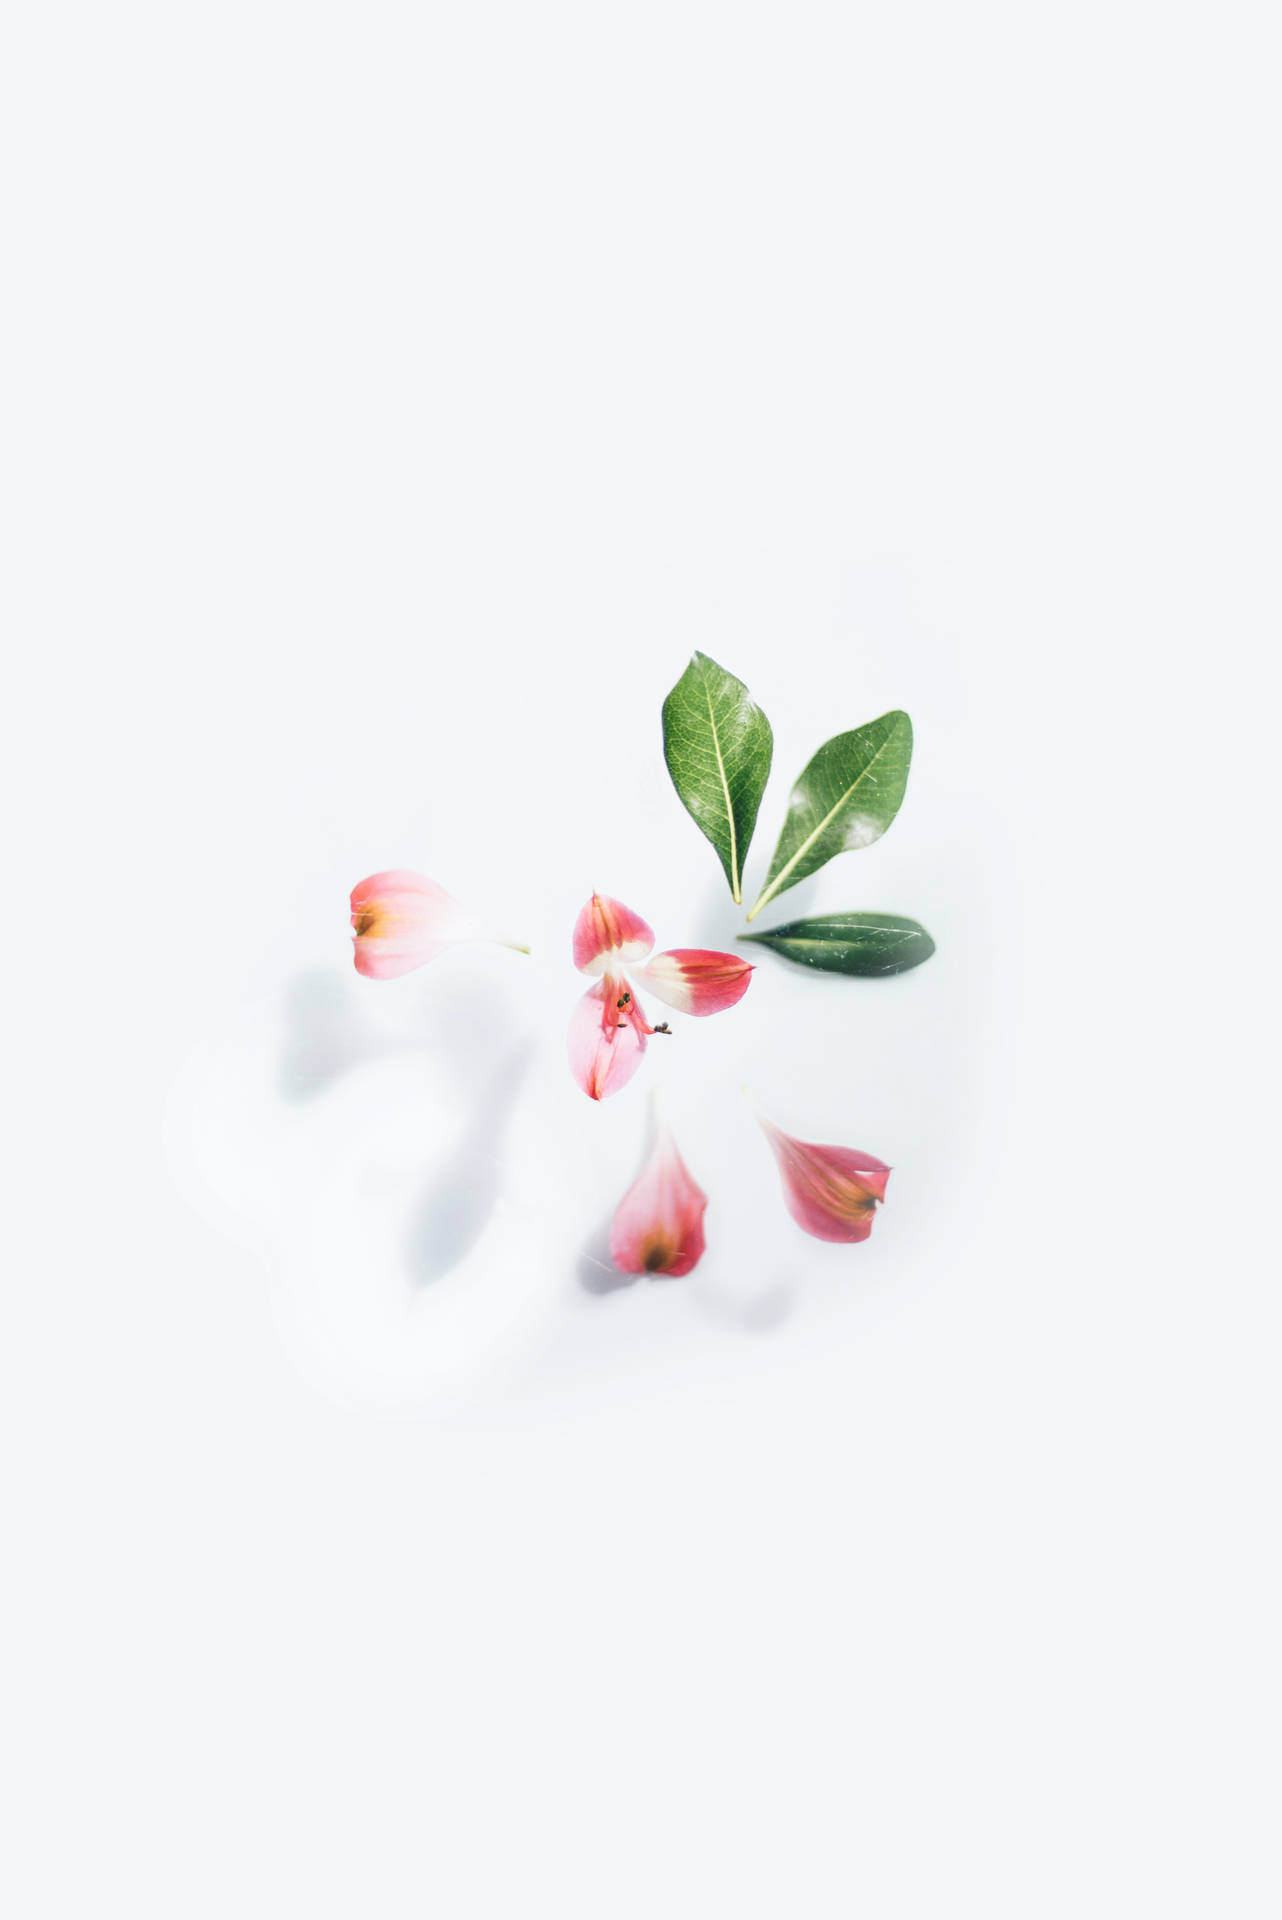 Pink Petals In White Background Background